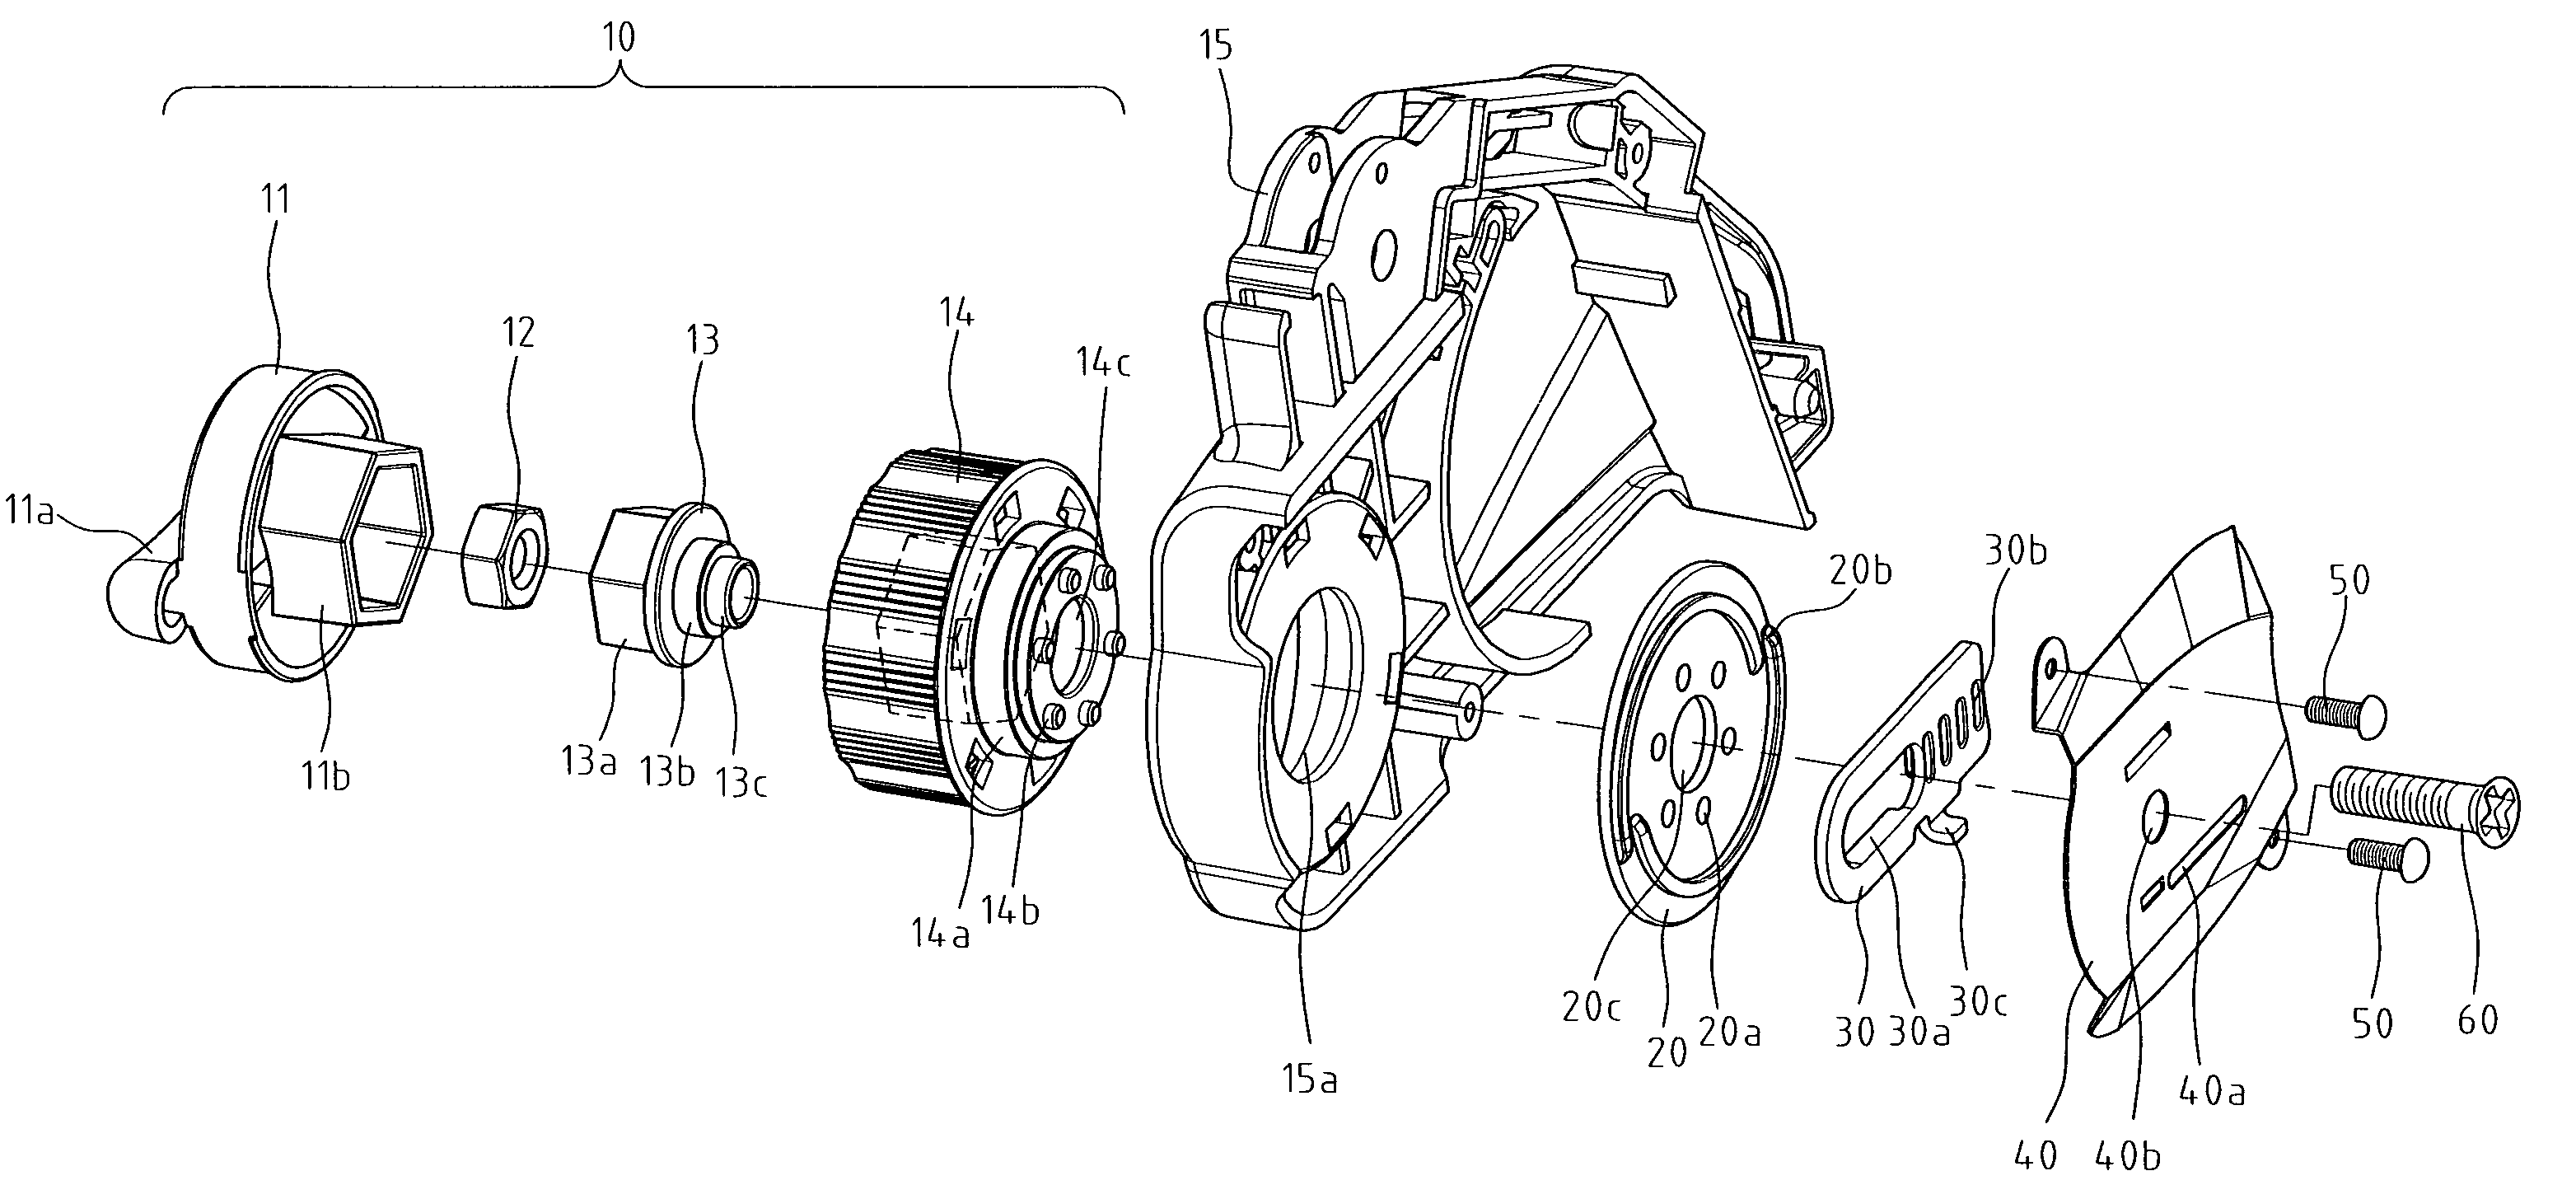 Tension-adjusting device for a chain in chain saw